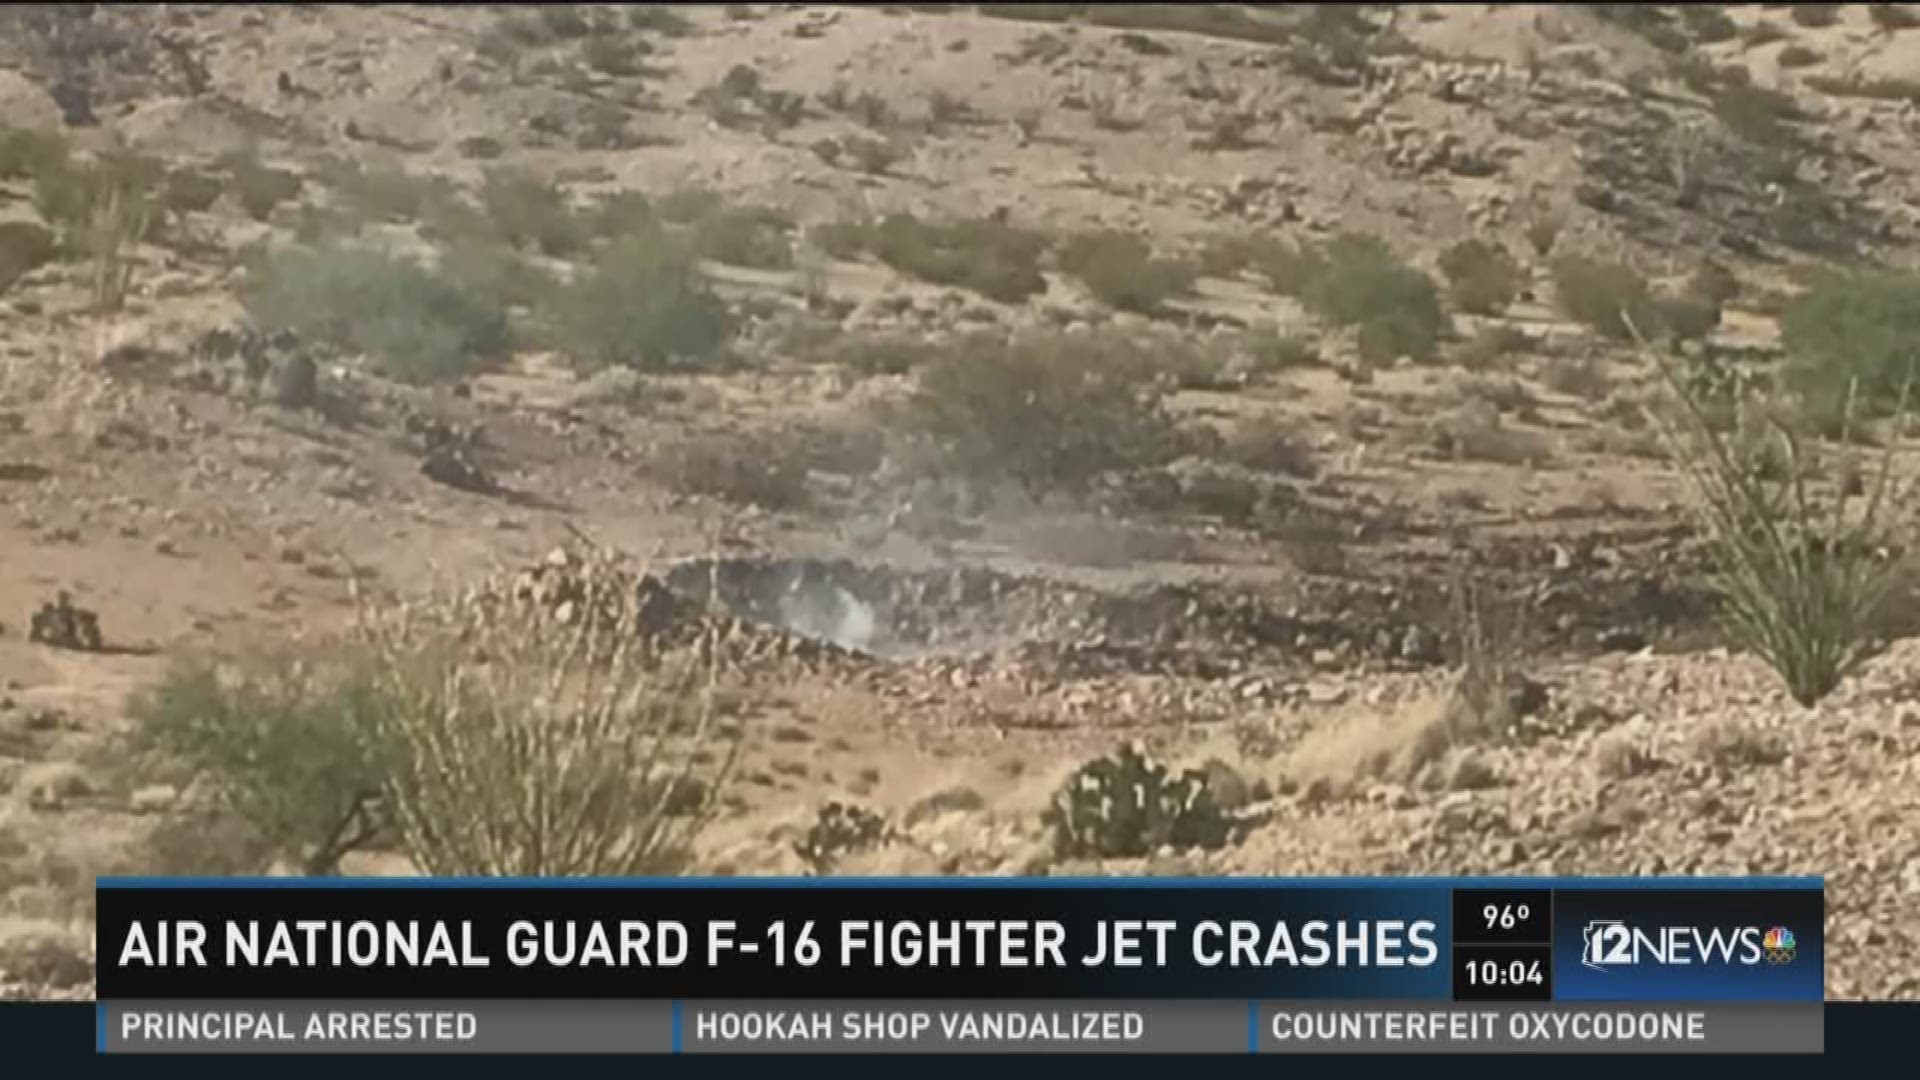 The Graham County Sheriff's Office reported that there were no survivors from an  F-16 jet crash Tuesday afternoon northwest of Safford.